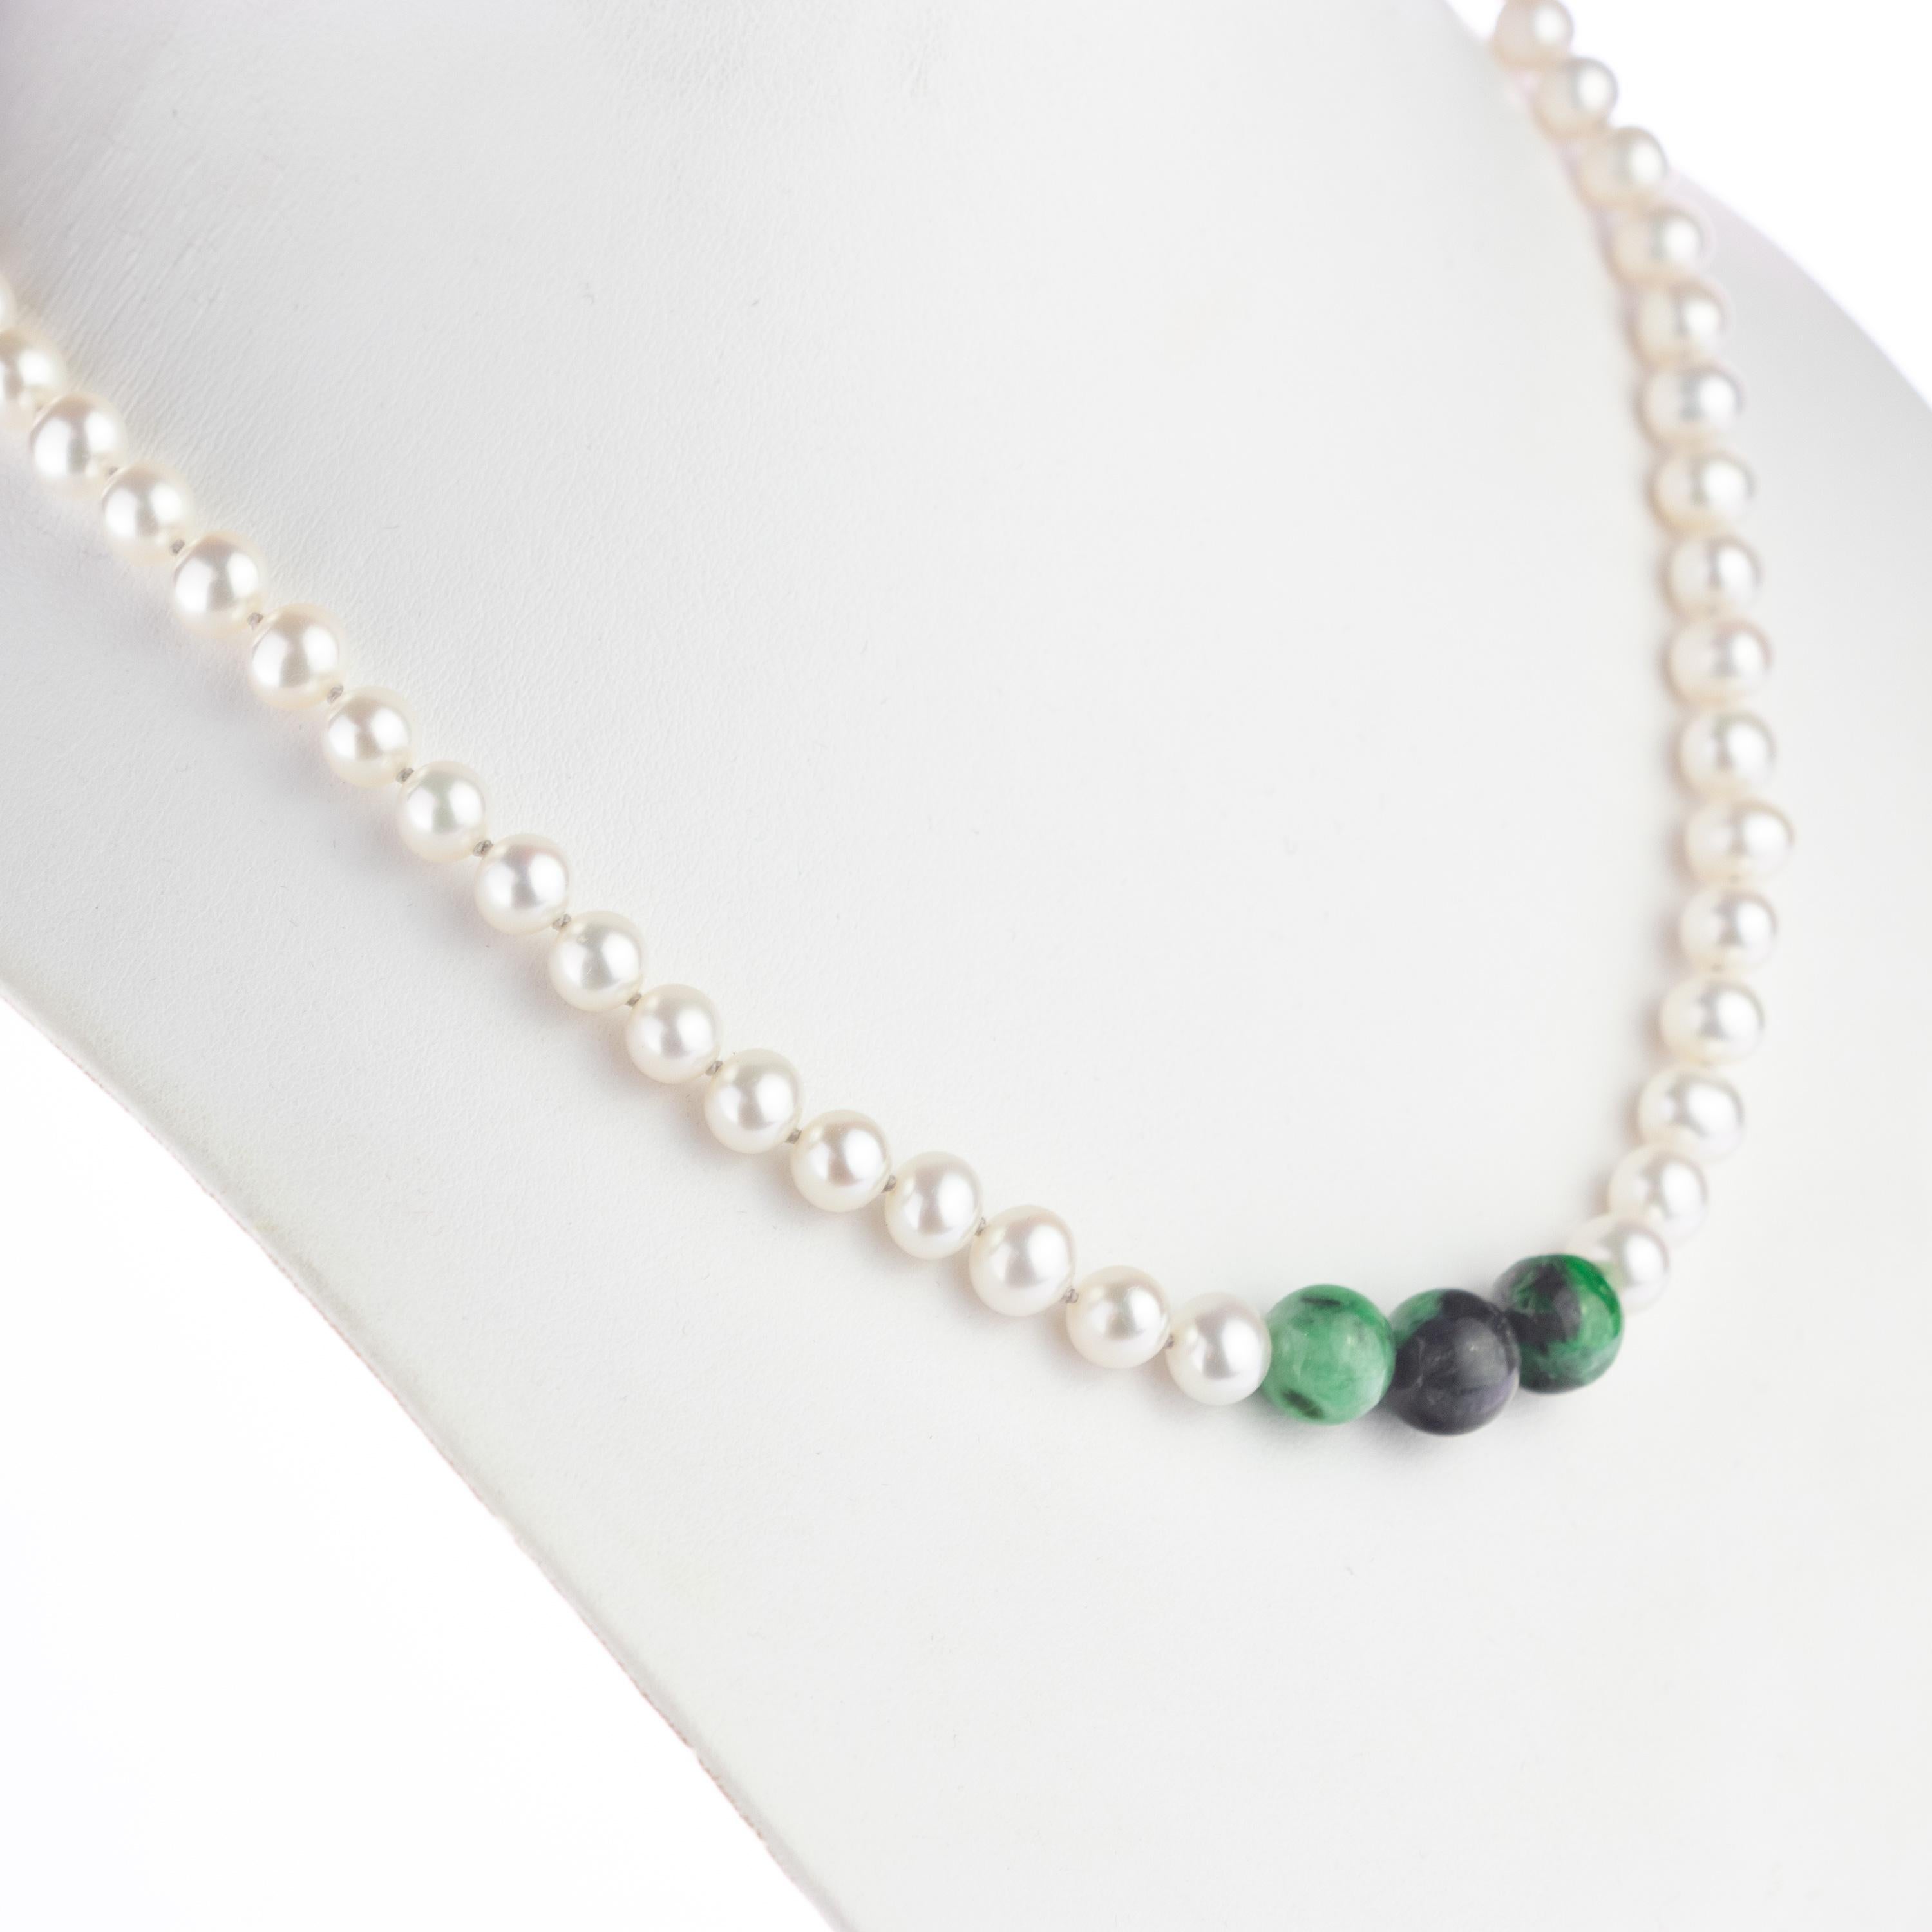 A timeless design meets charming jade. Top quality materials for a Made in Italy iconic necklace. First class freshwater pearls and jade with an elegant closure in 18k yellow gold. An iconic collier for an elegant outfit.

Pearls are thought to